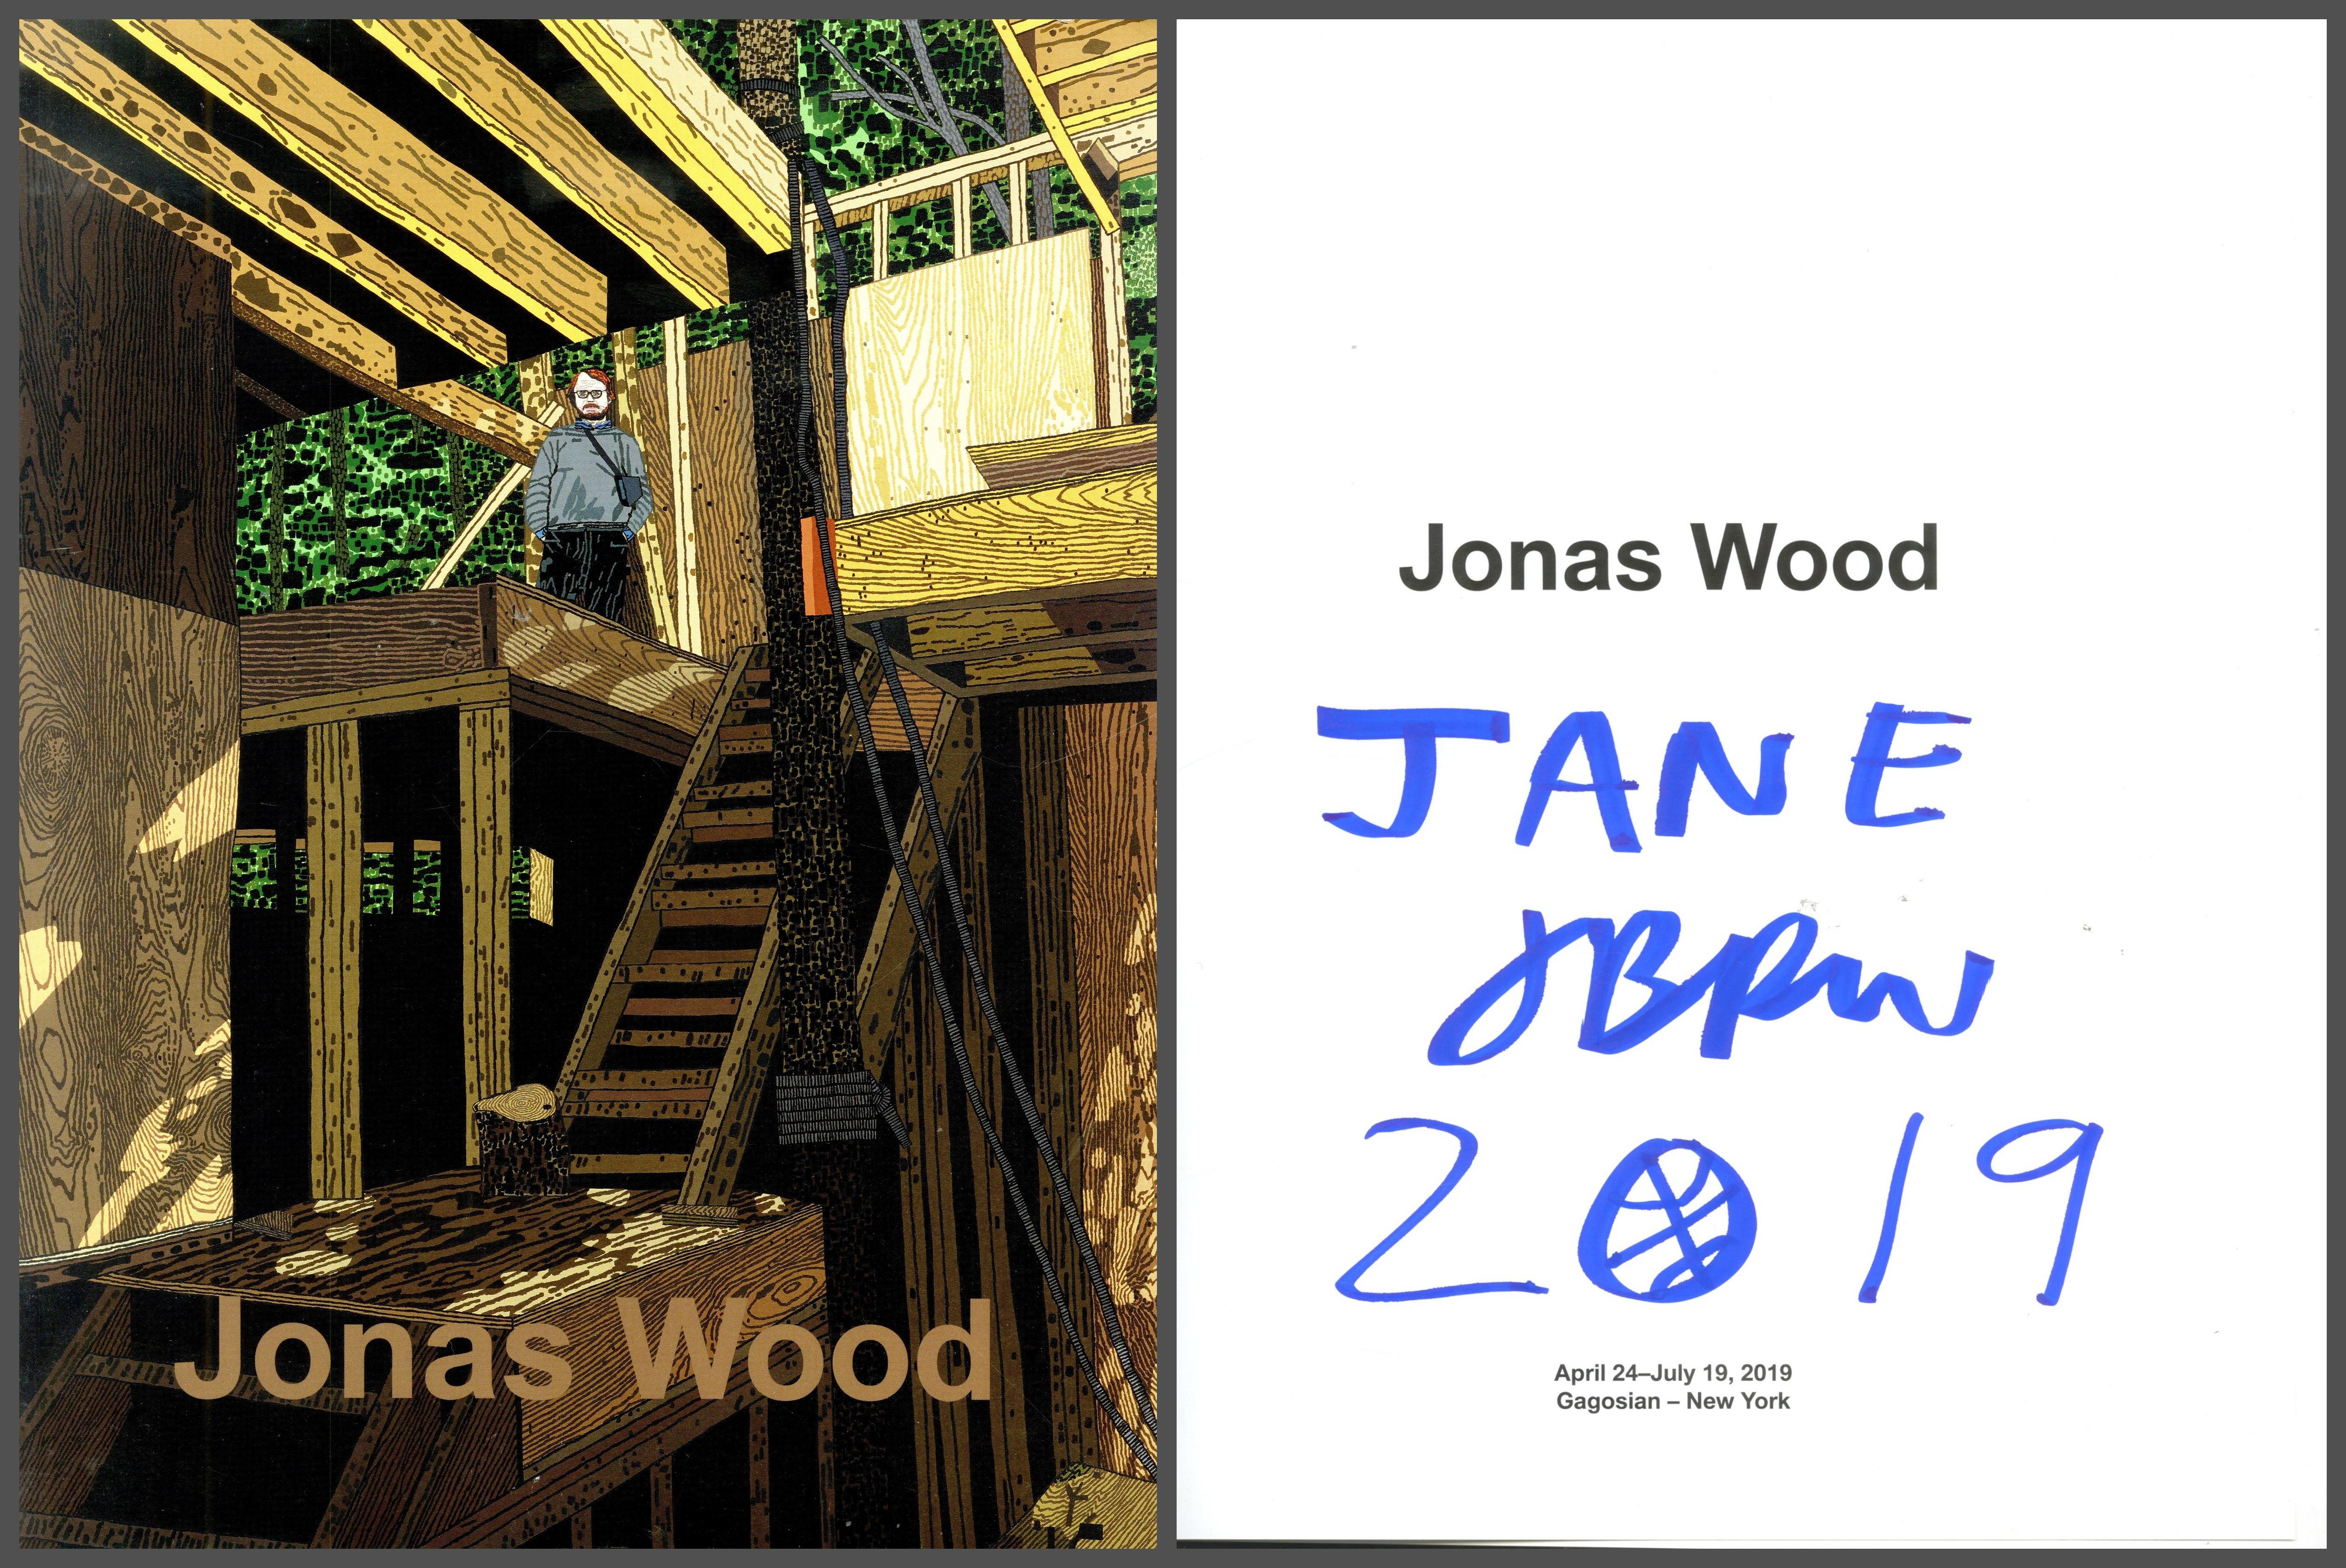 Jonas Wood Paintings (Hand Signed & Inscribed), 2019
Gagosian catalogue monograph, hand signed, dated and inscribed to Jane
Hand signed, dated and inscribed by Jonas Wood to Jane, with artist's trademark basketball flourish in the date
12 × 9